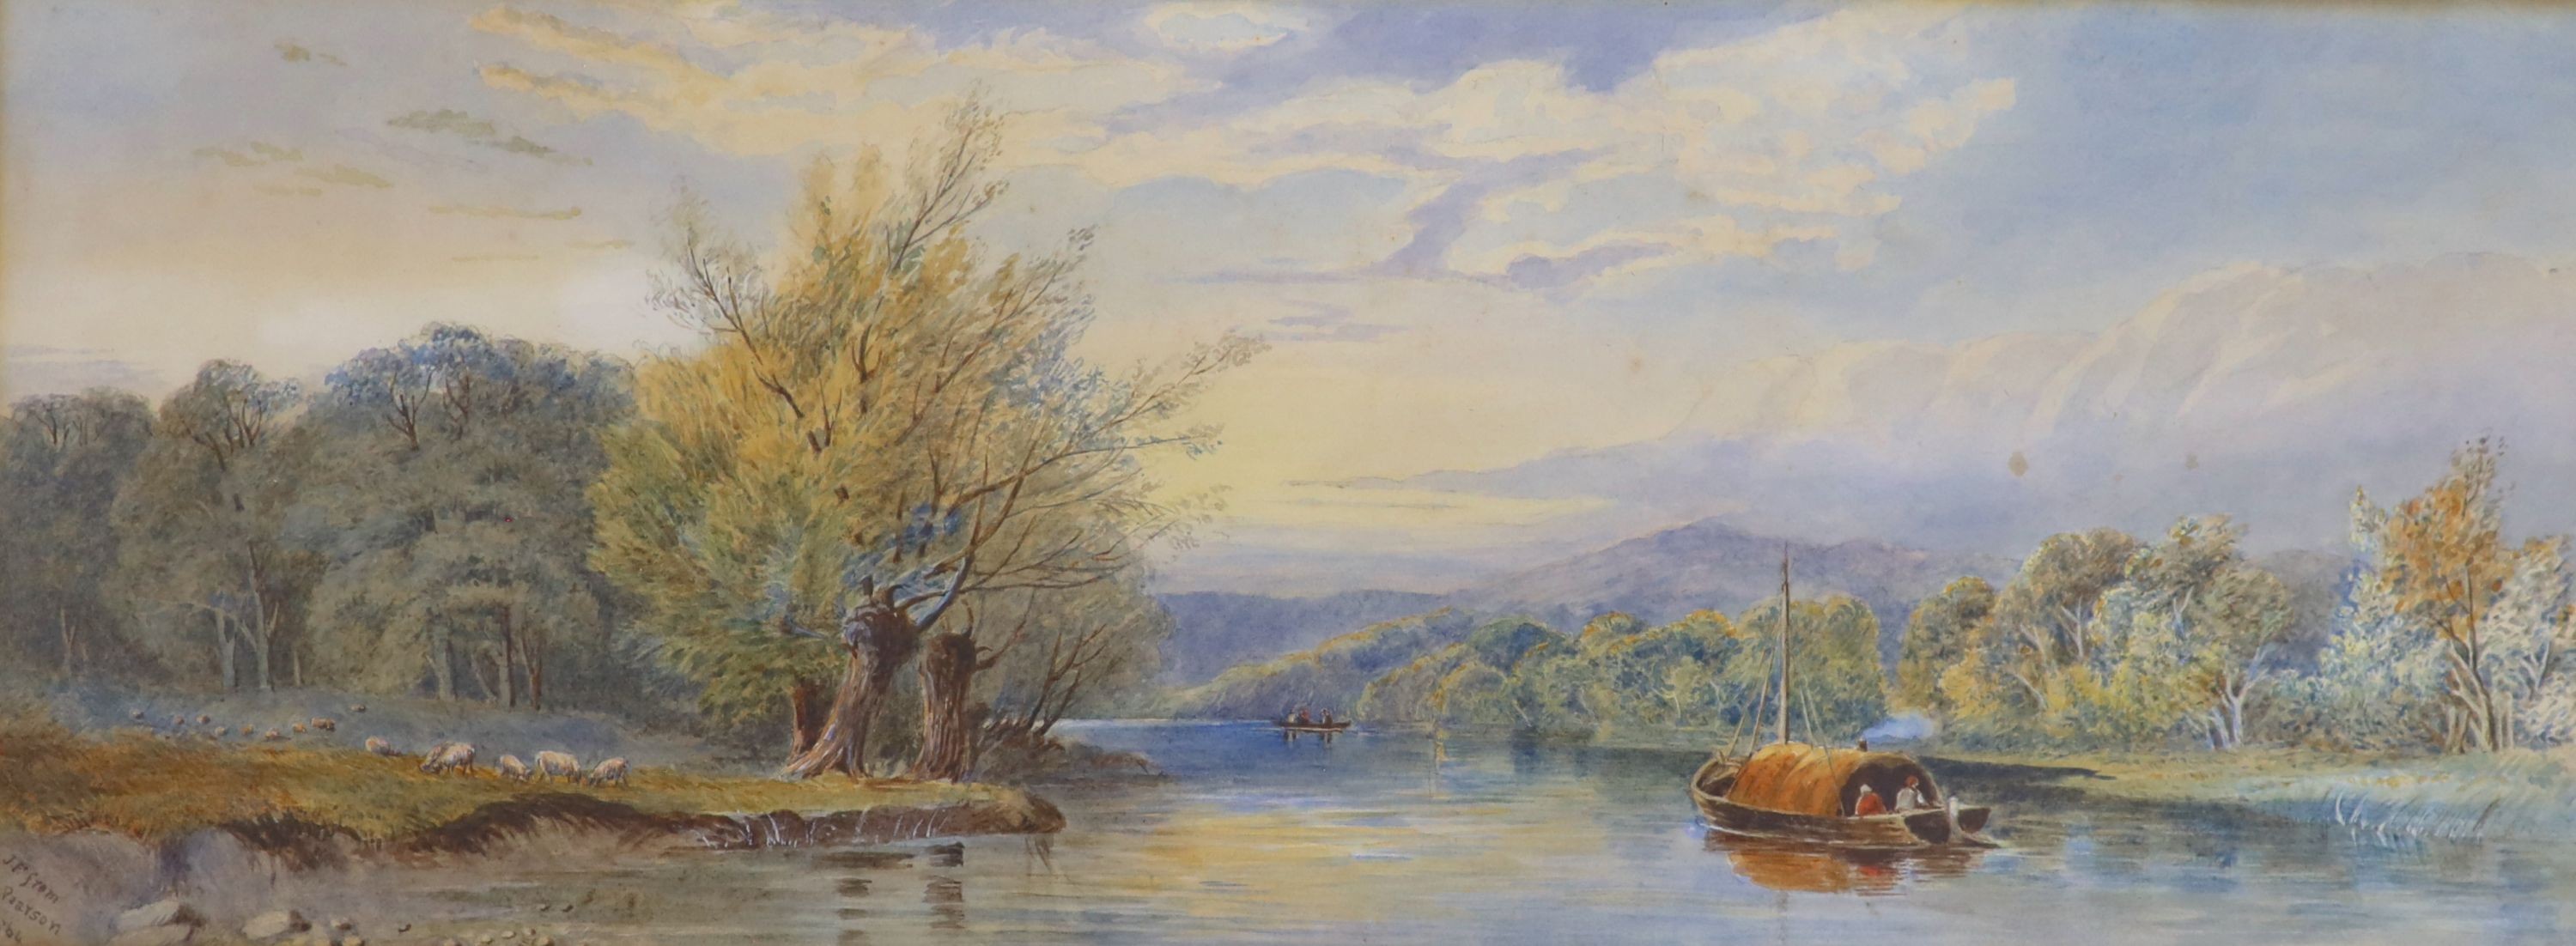 Cornelius Pearson (1805-1891), two watercolours, River landscape with barge and cattle beside a loch, signed and dated 1864/1867, 18 x 47 cm.